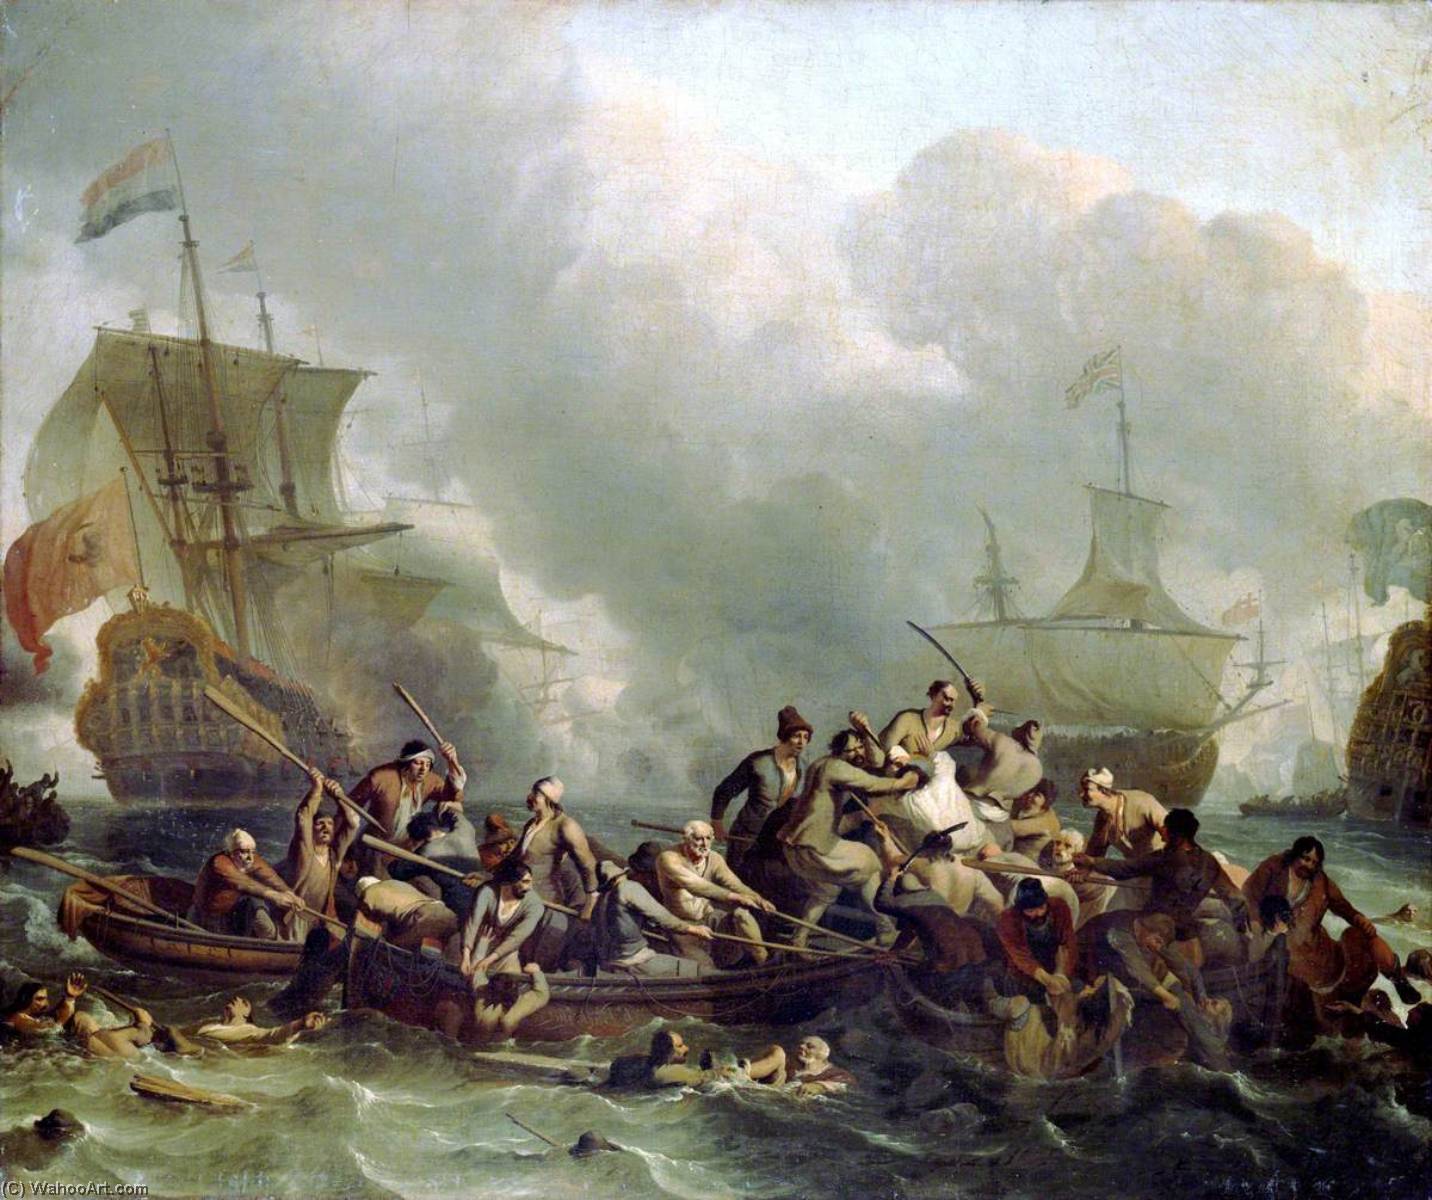 WikiOO.org - 백과 사전 - 회화, 삽화 Ludolf Backhuysen - The Battle of Texel, 11 August 1673